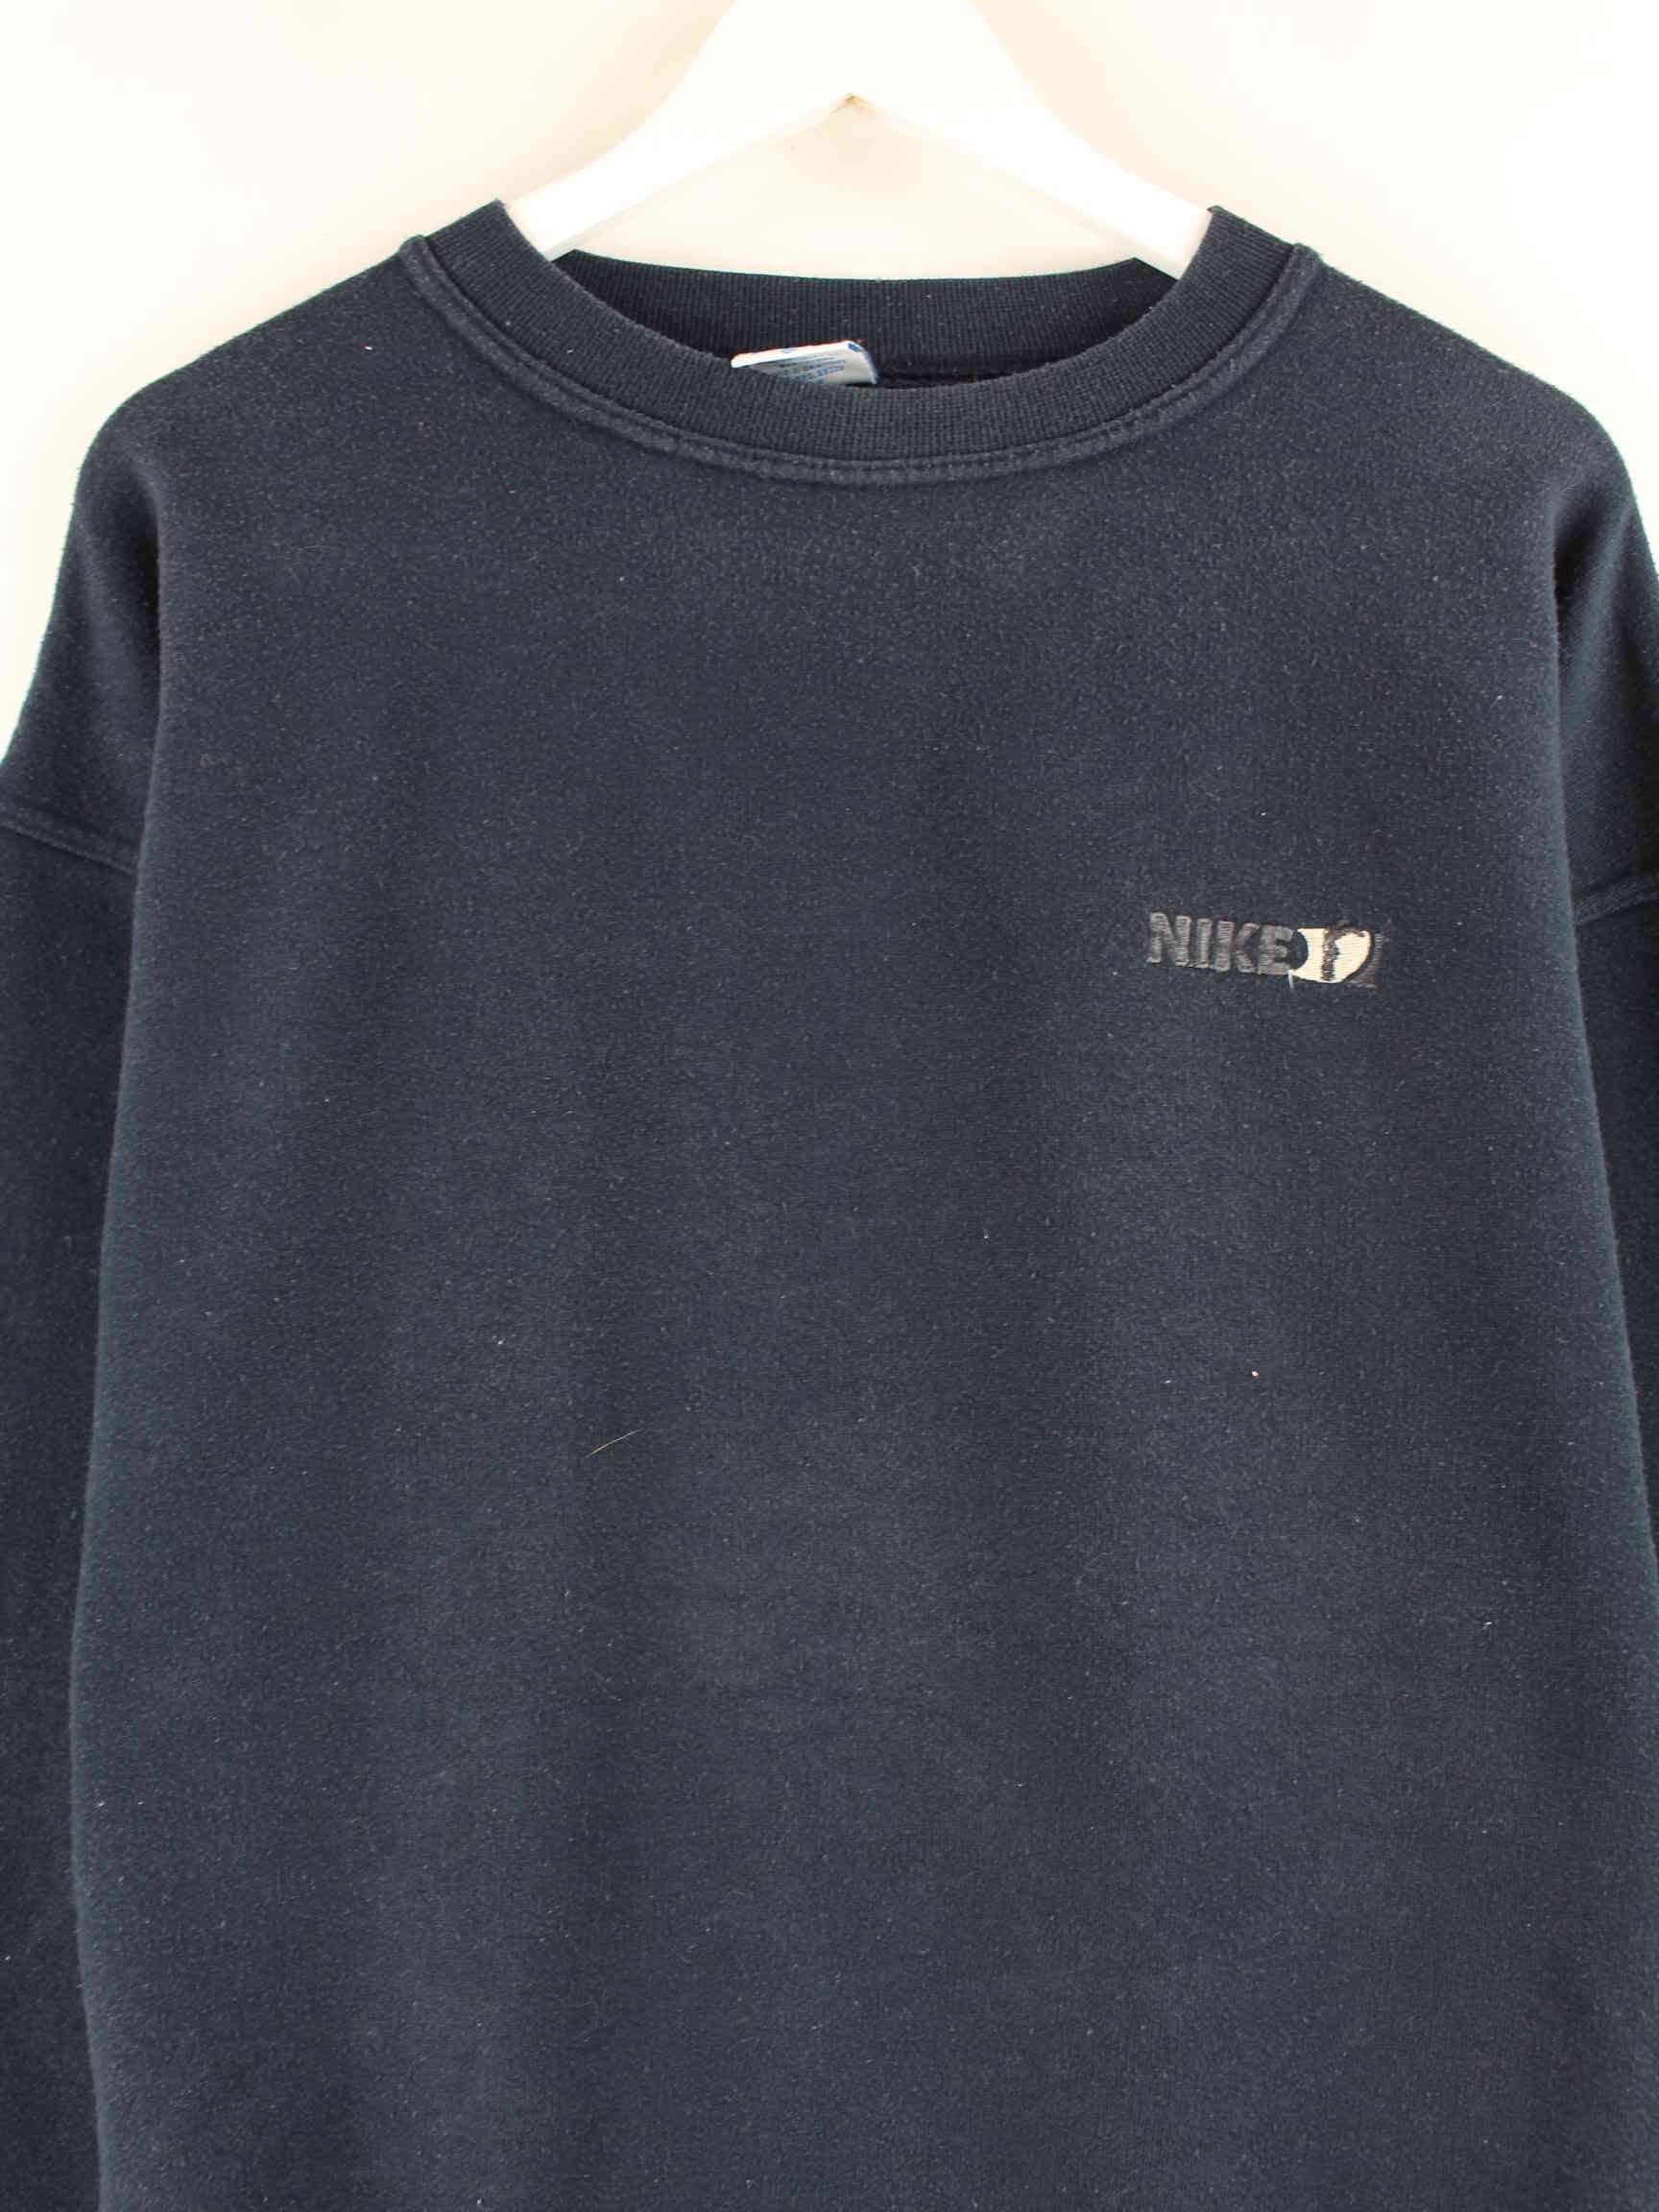 Nike y2k Embroidered Sweater Blau XL (detail image 1)